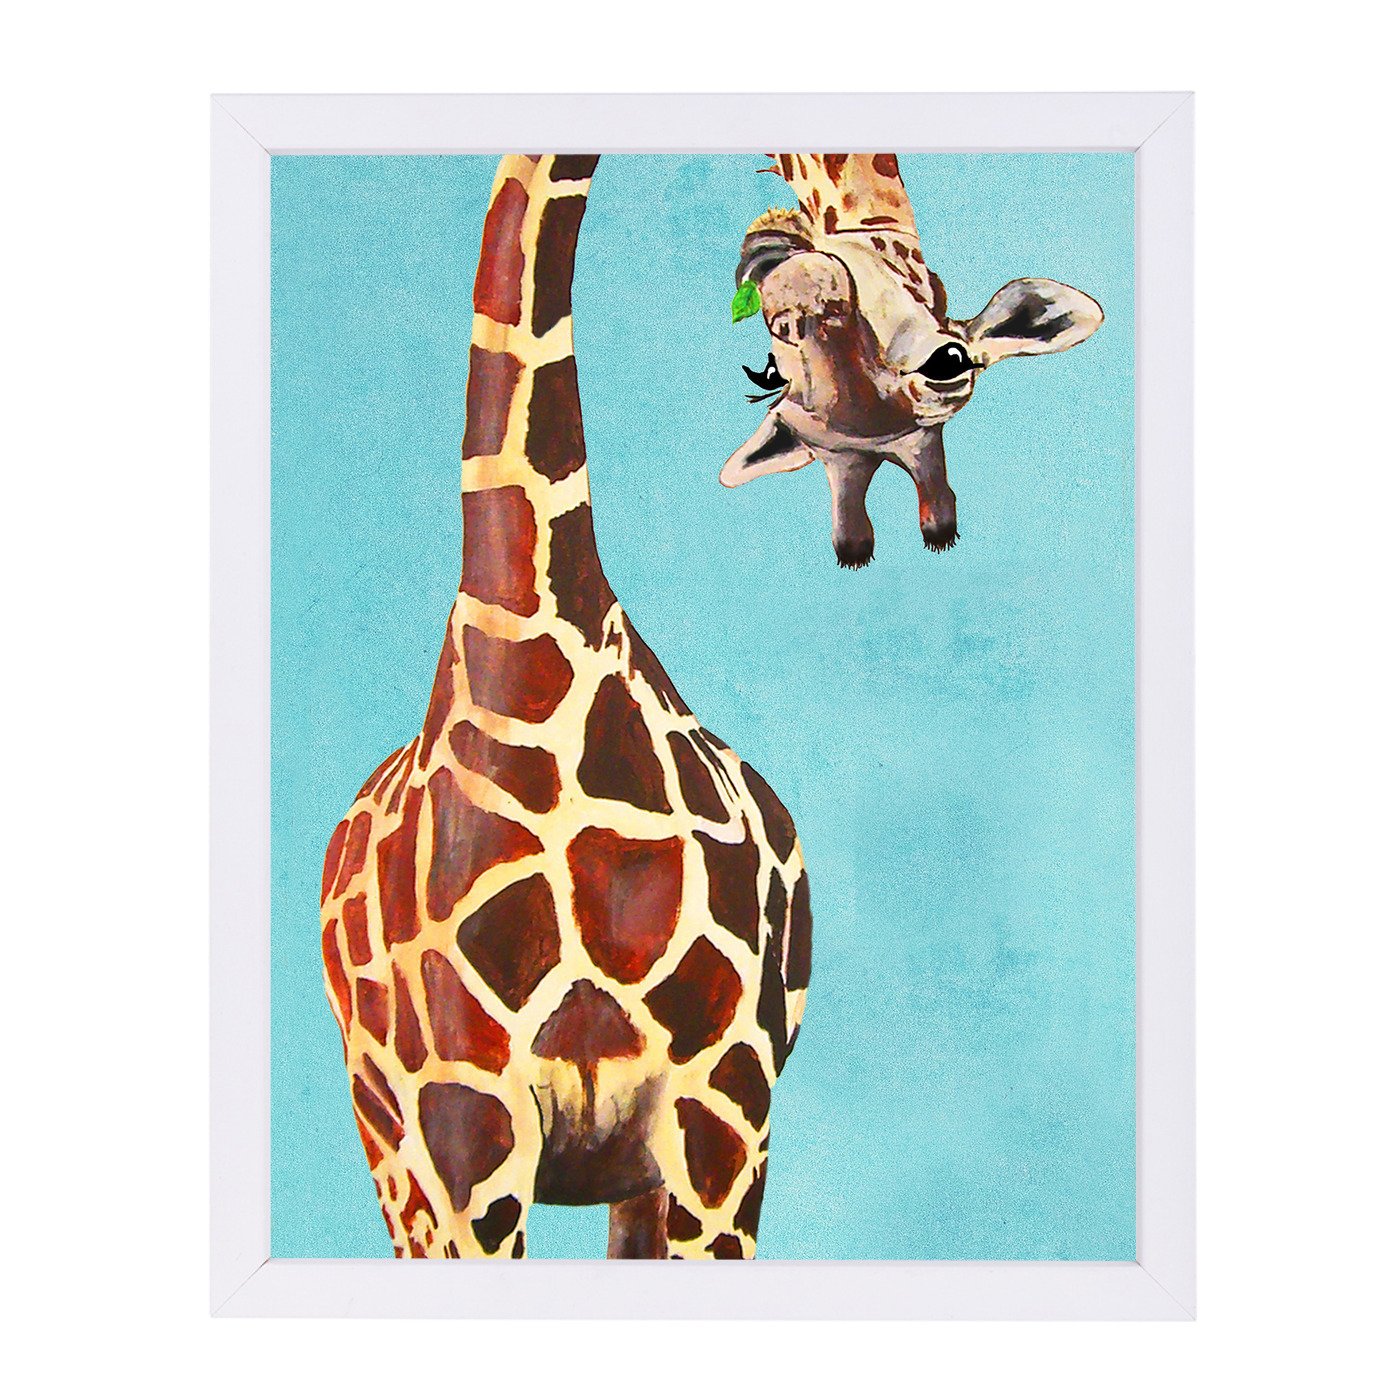 Giraffe With Green Leave By Coco De Paris - Framed Print - Americanflat